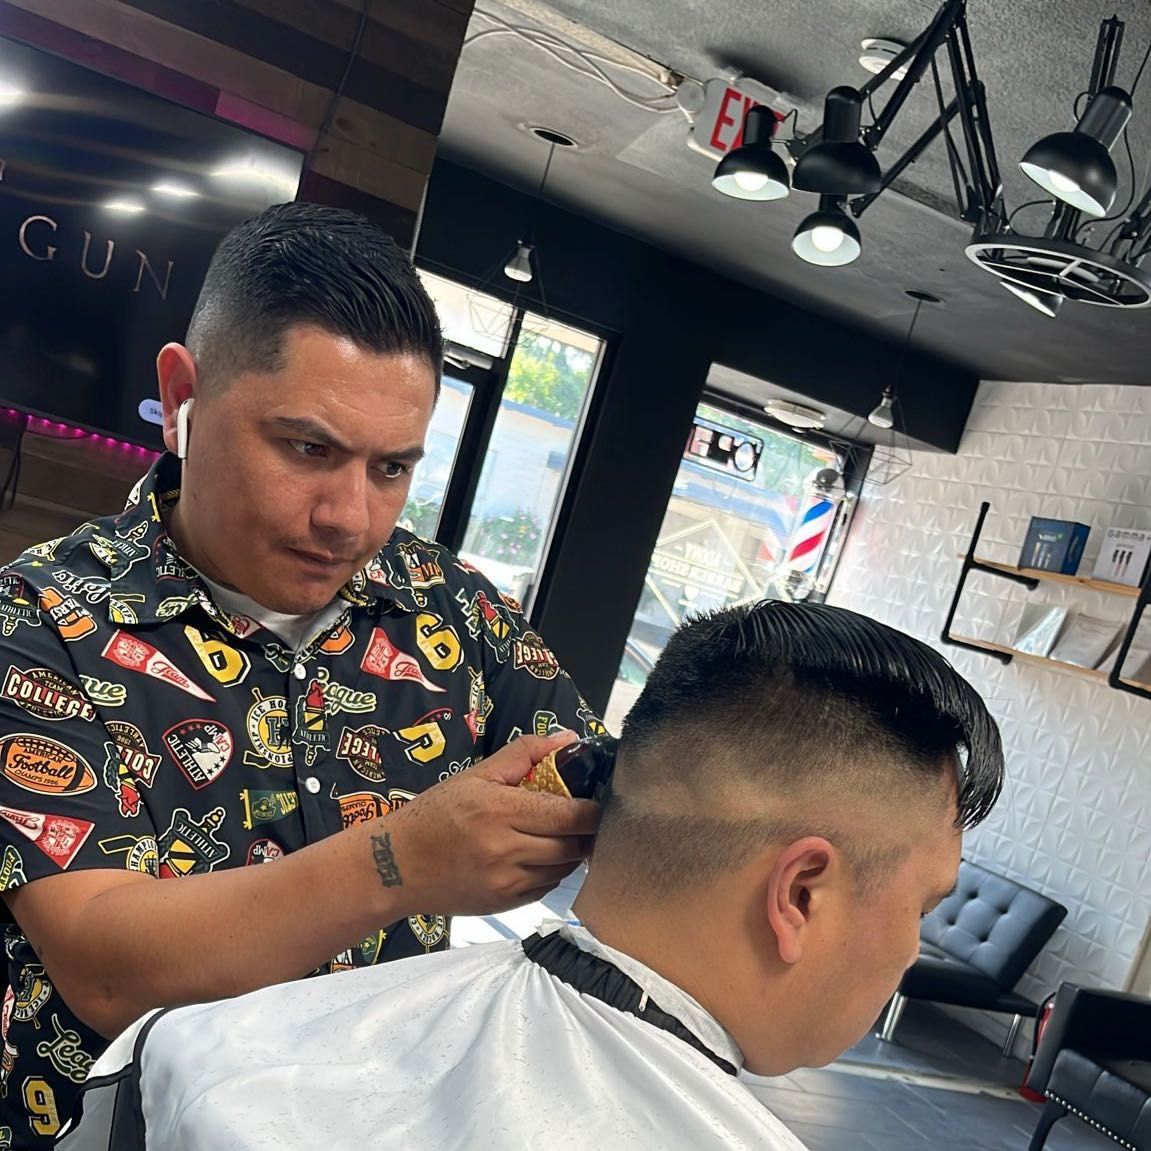 Andres Barber, 1315 Edgewater Dr, Orlando, 32804